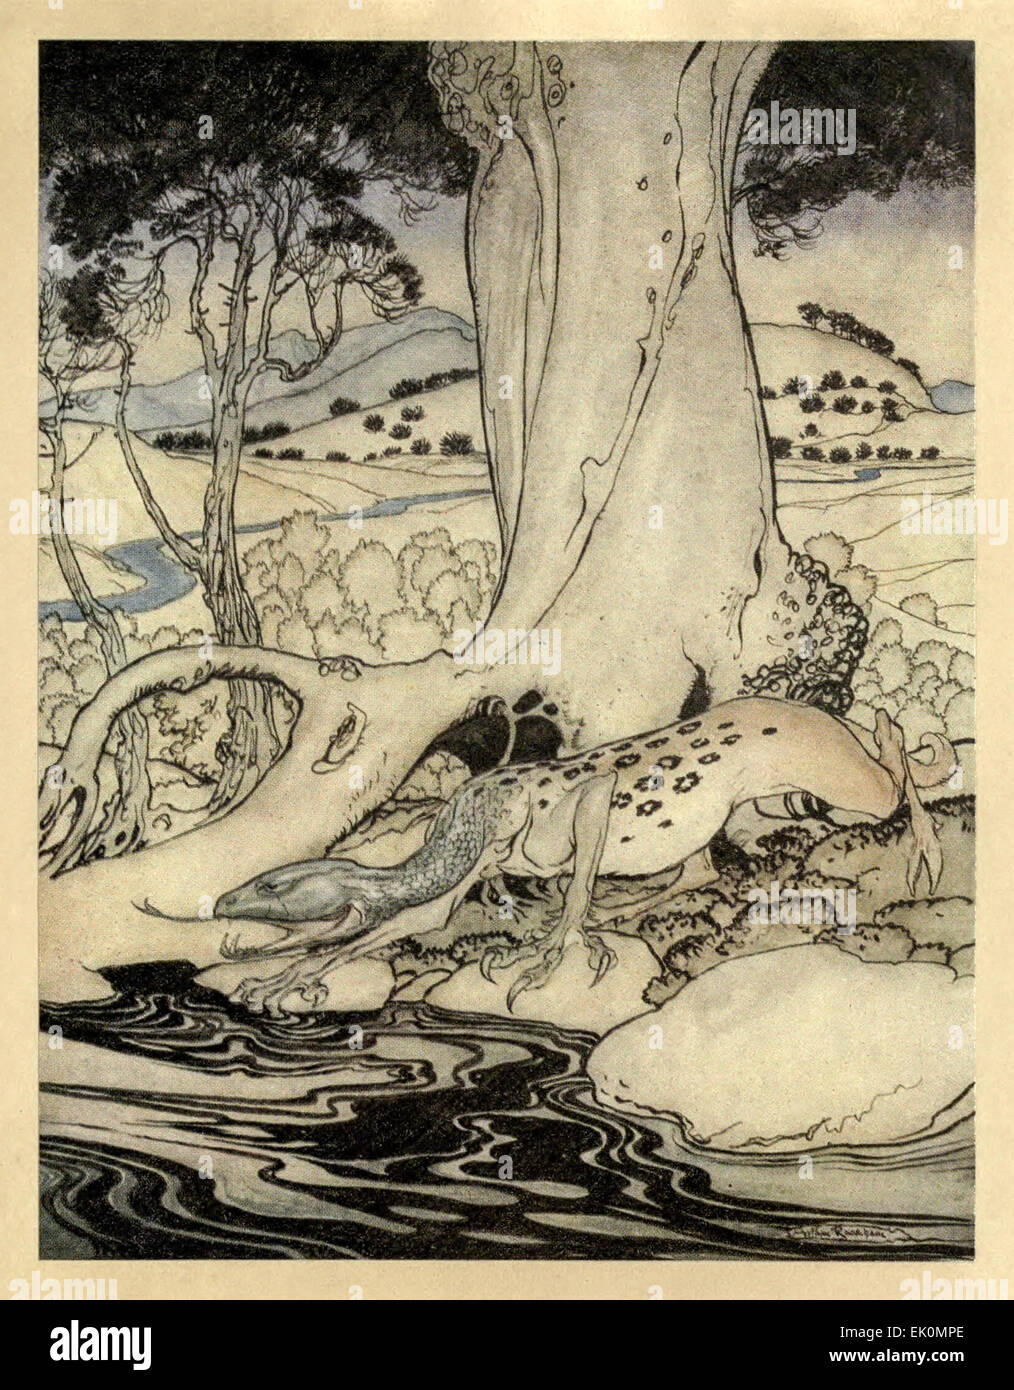 'The Questing Beast.' from 'The Romance of King Arthur and his Knights of the Round Table', illustration by Arthur Rackham (1867-1939). See description for more information. Stock Photo